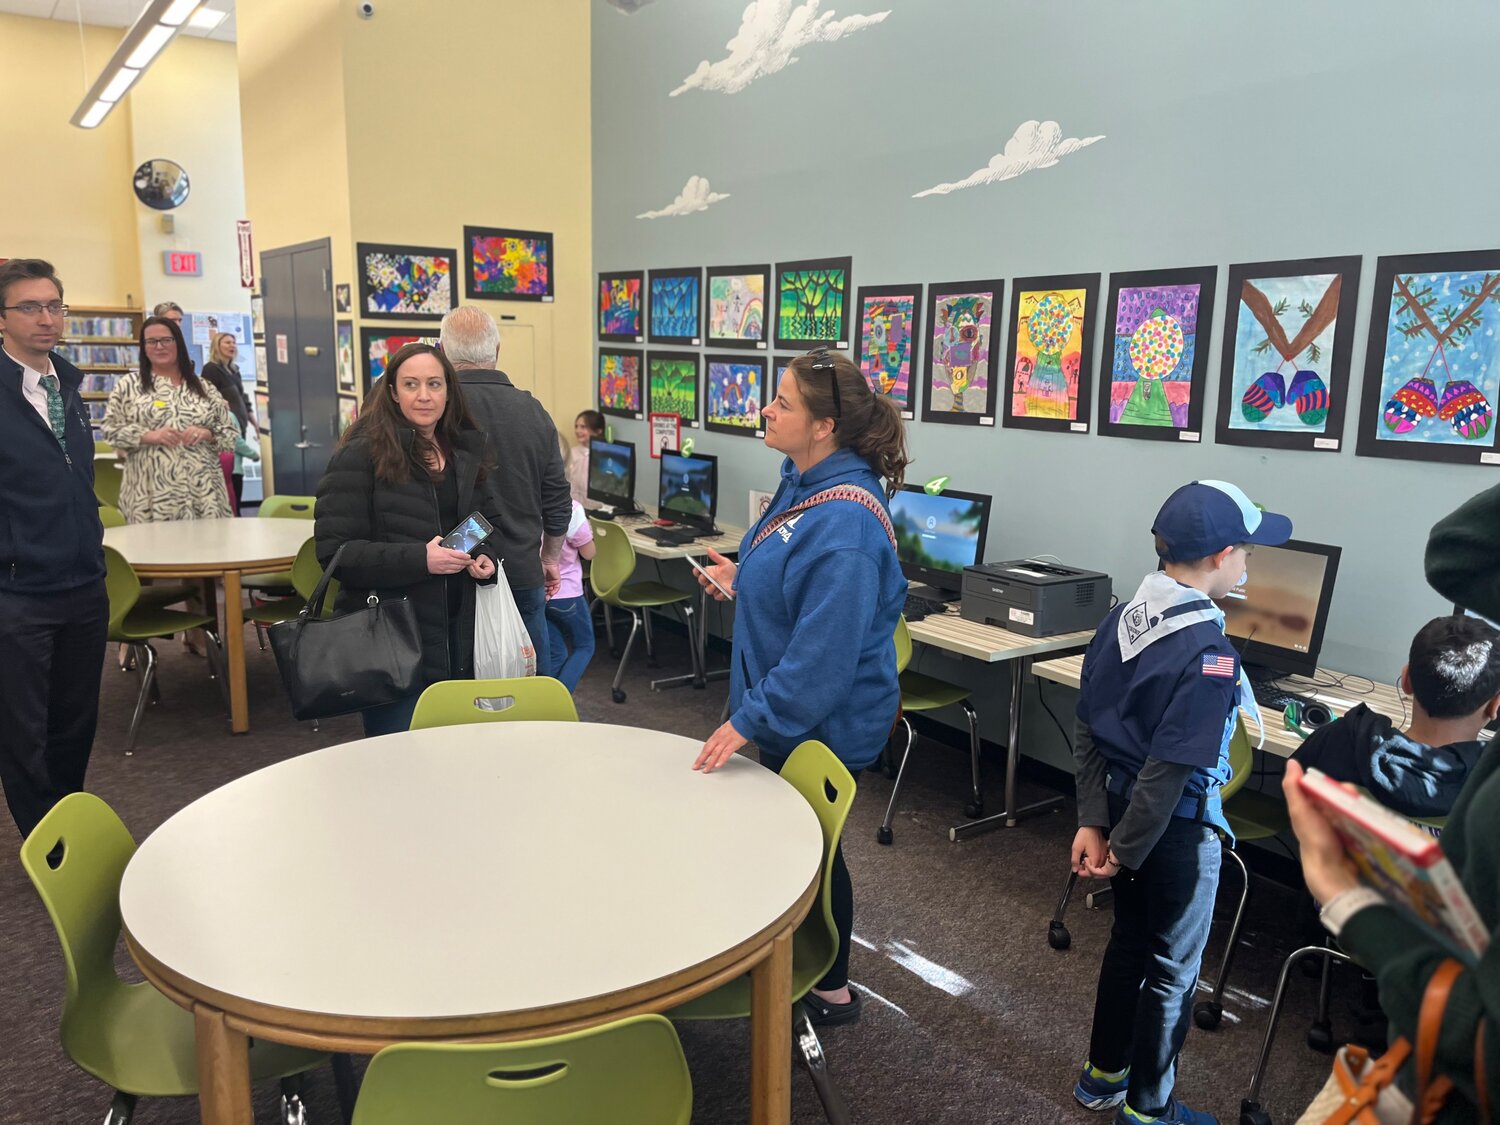 Students and parents explore the different exhibits hanging throughout the library.